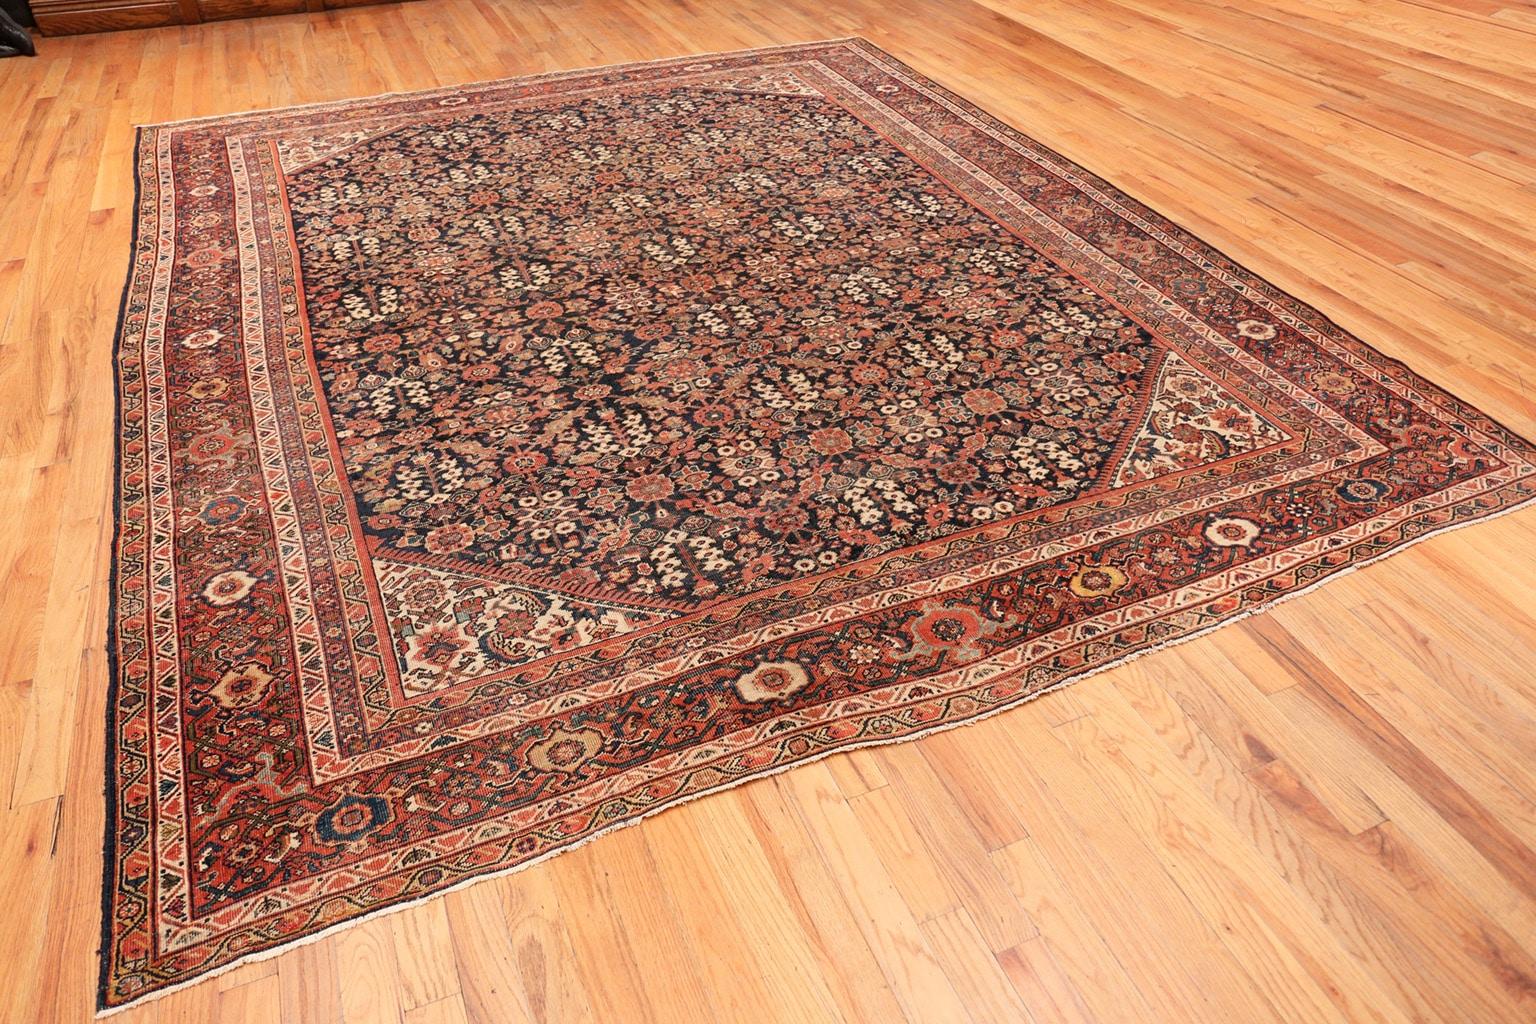 20th Century Blue Background Persian Antique Sultanabad Rug. Size: 11 ft x 13 ft 4 in